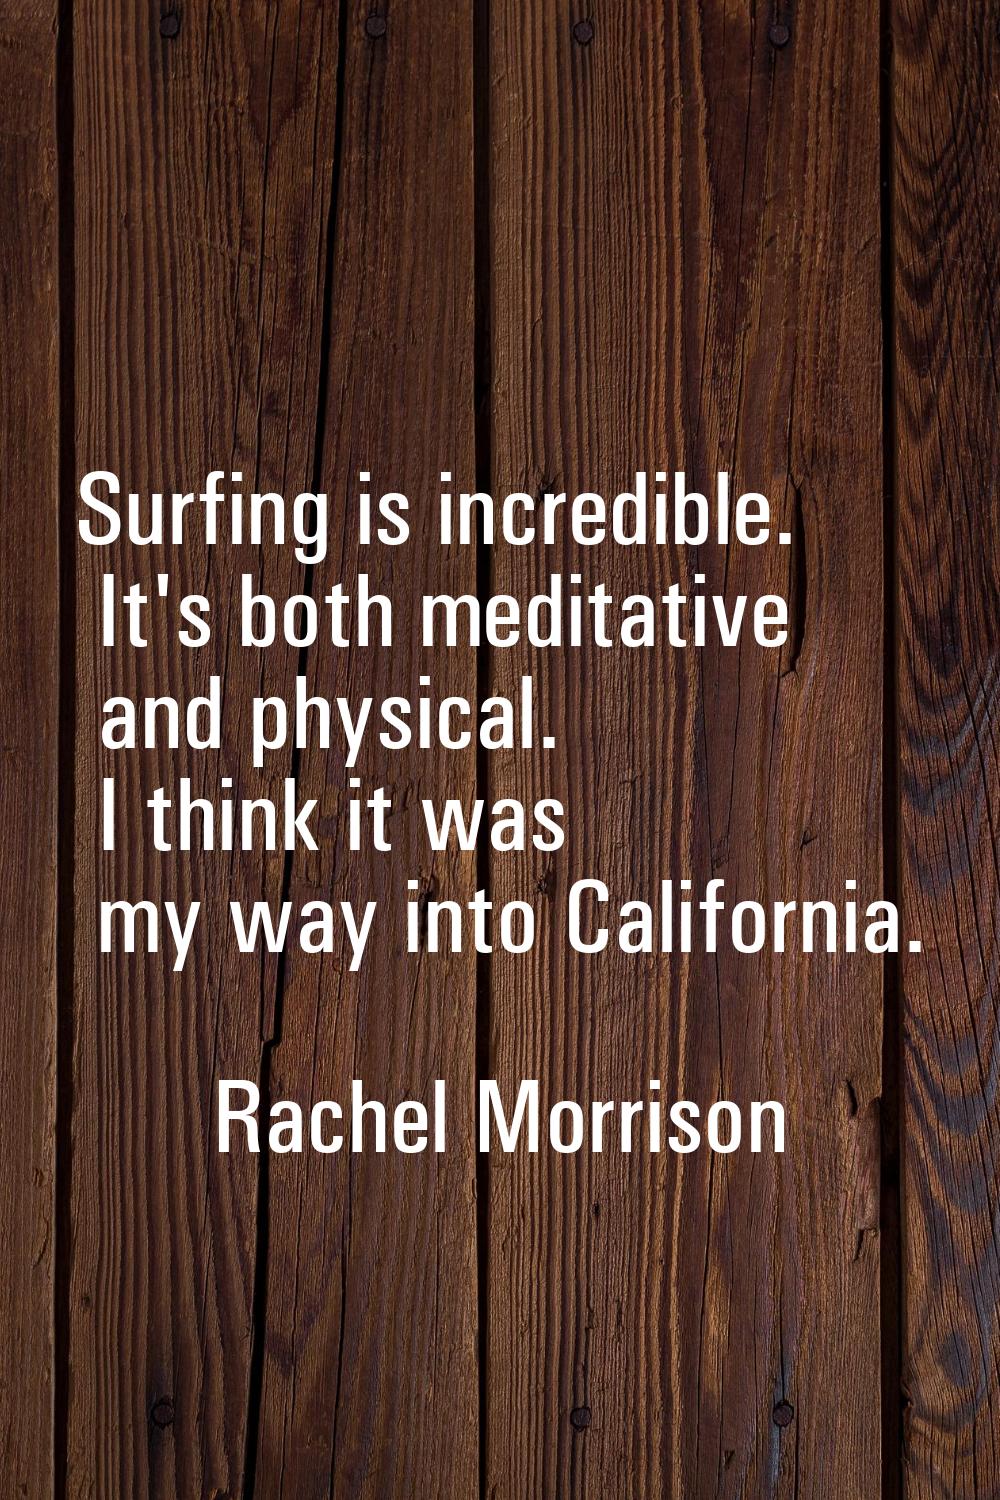 Surfing is incredible. It's both meditative and physical. I think it was my way into California.